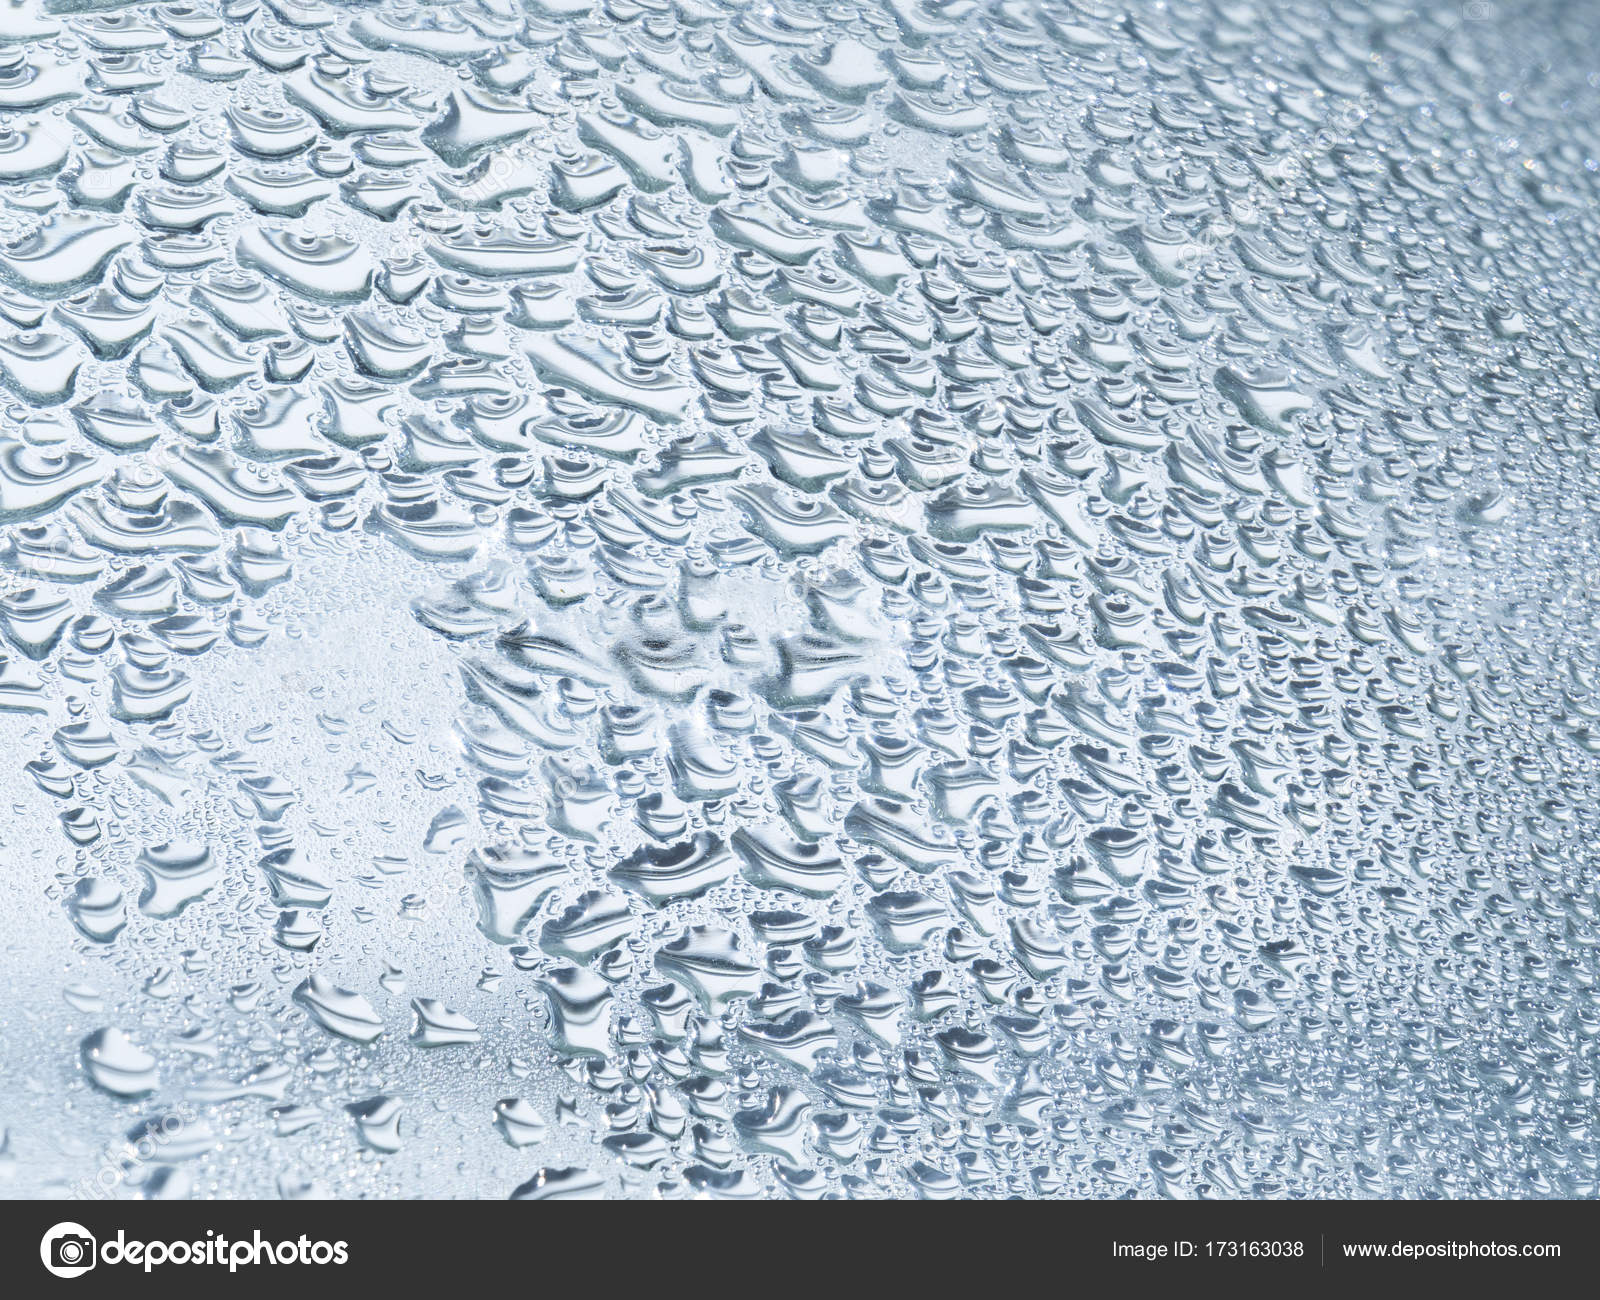 abstract background water drops on the surface with full of droplets ...